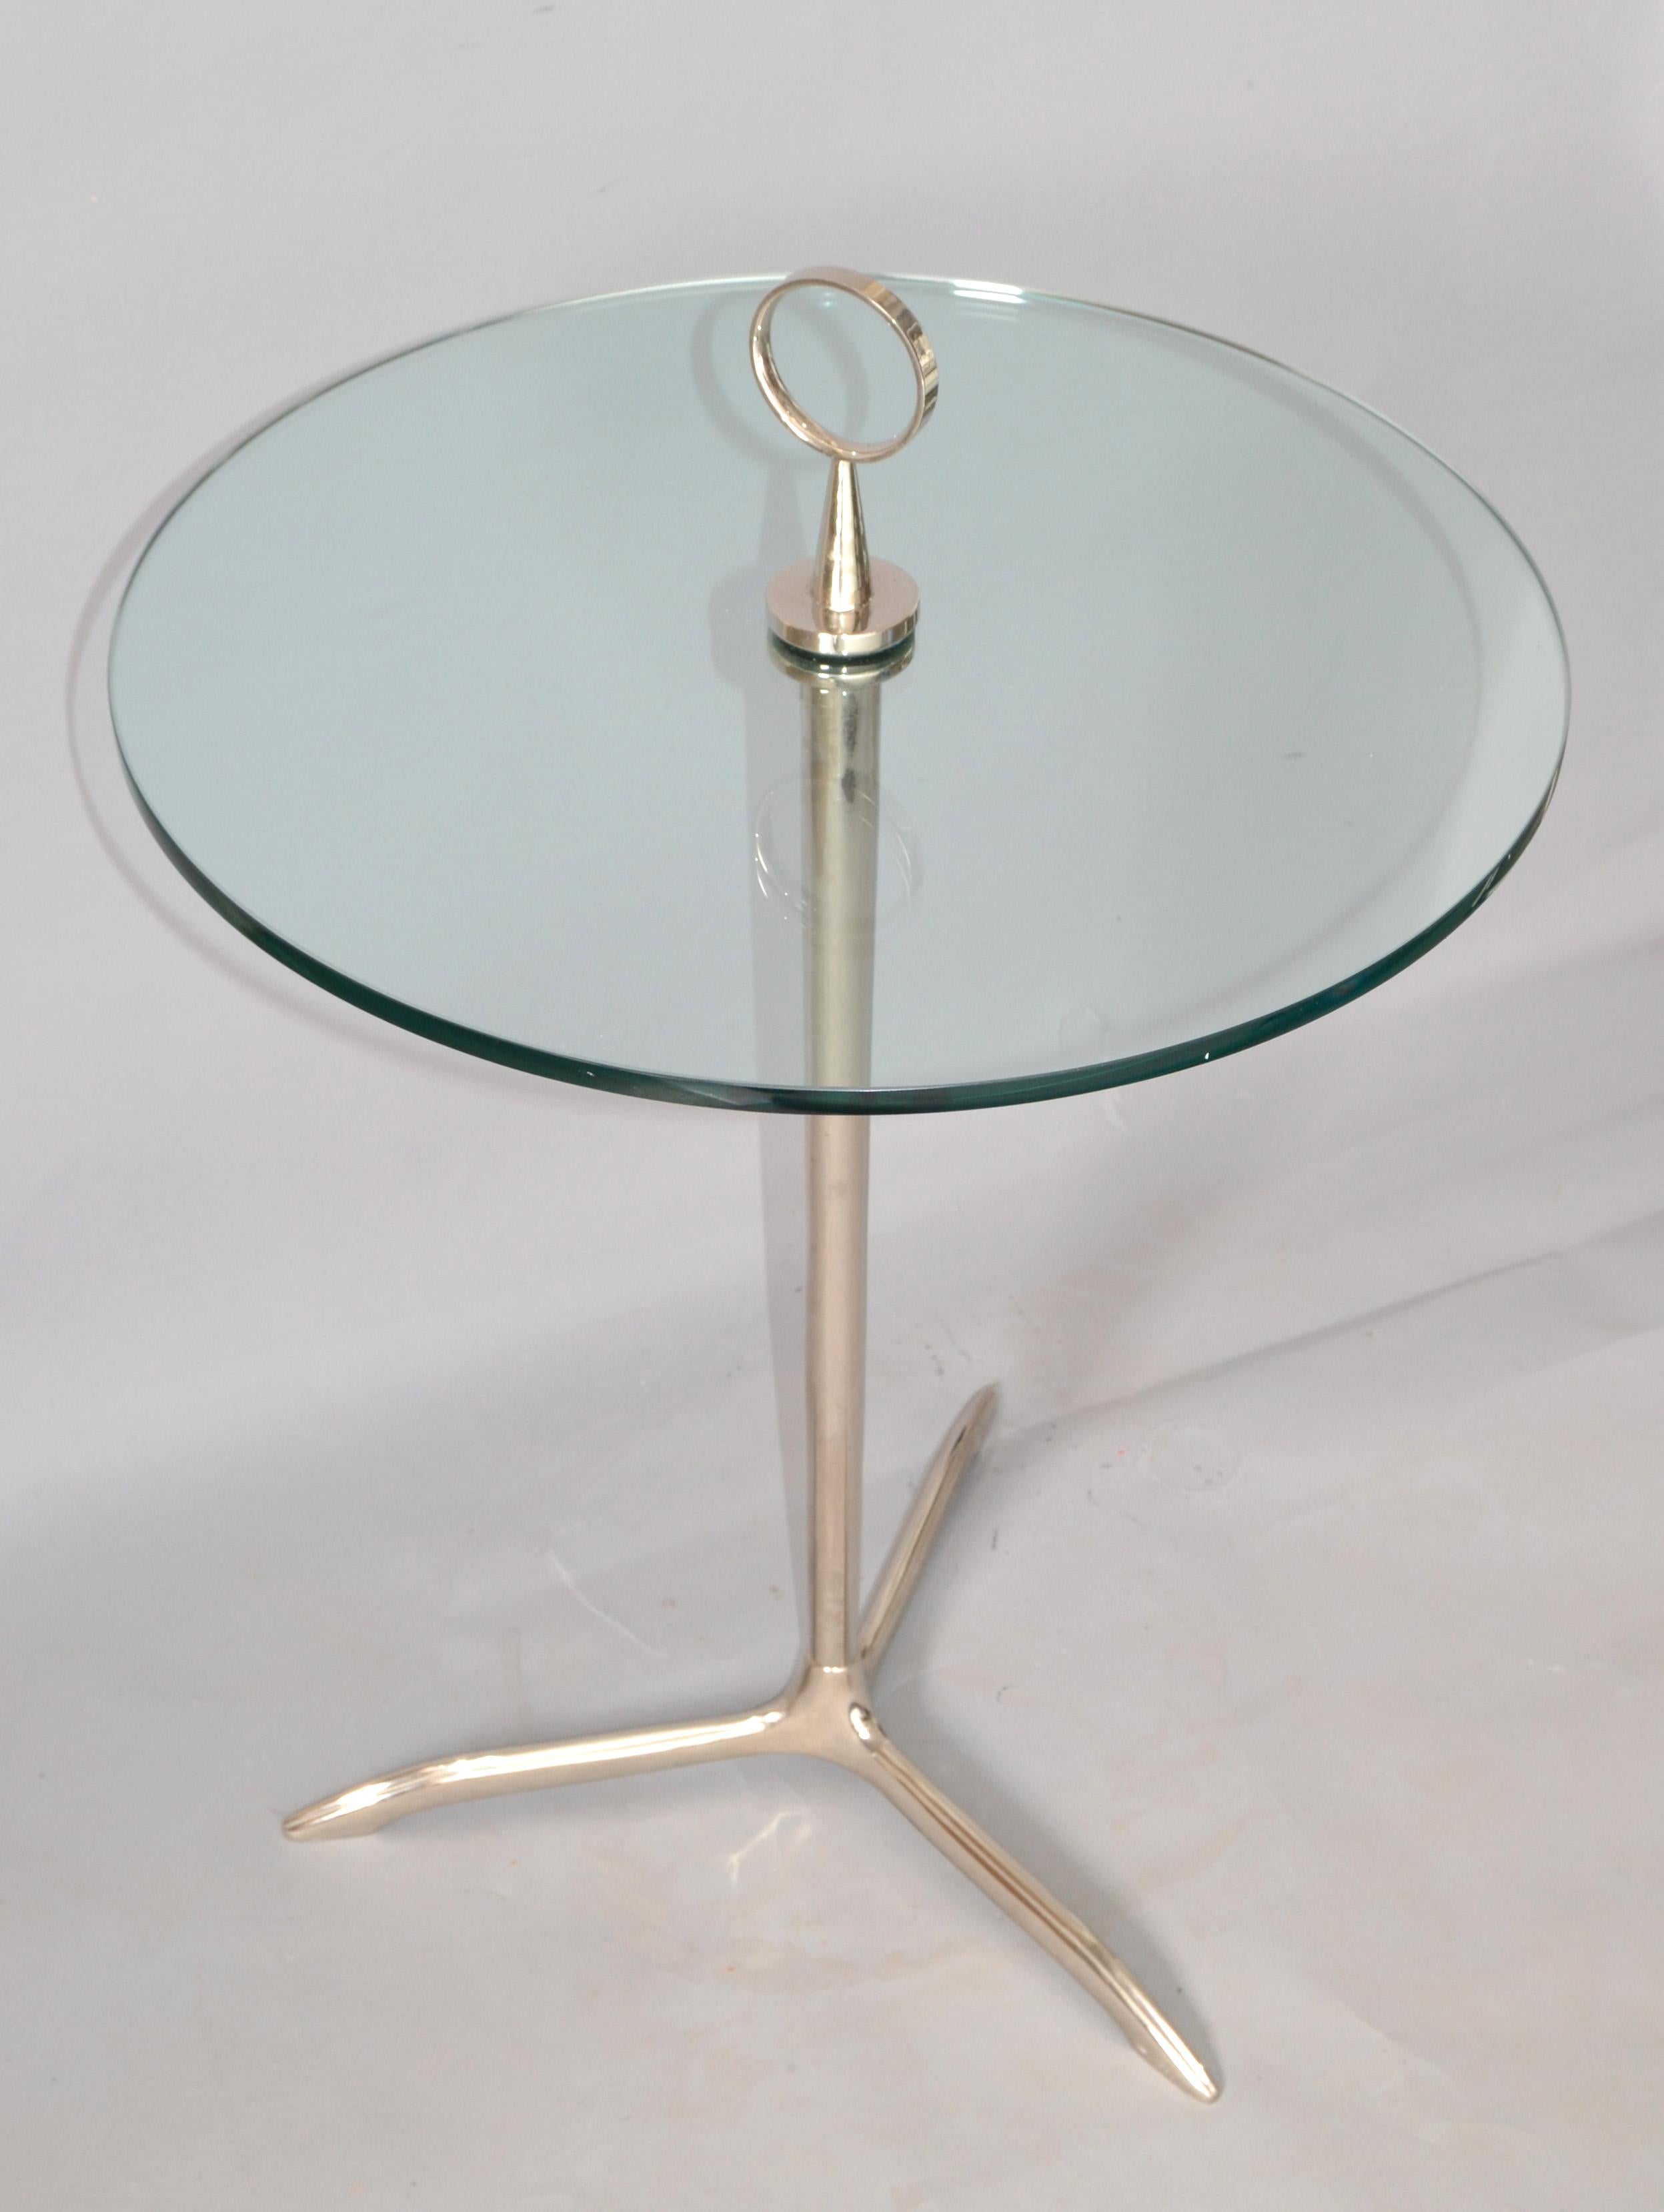 Cesare Lacca Style Stainless Steel & Round Glass Tripod Side Table, Italy, 1950 For Sale 4